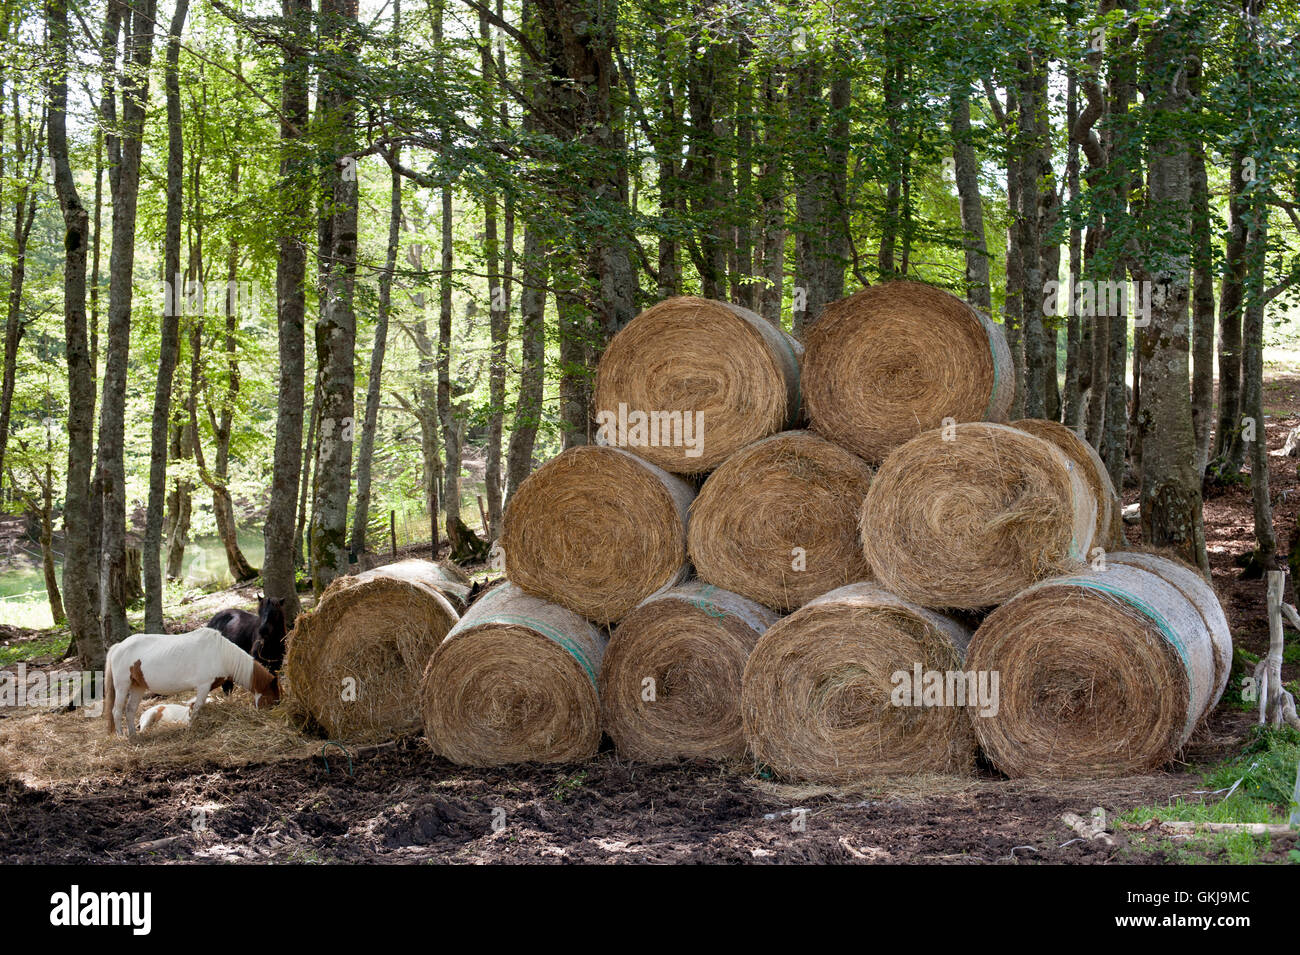 Many round haystack and horses eating with  green wood trunks in background Stock Photo